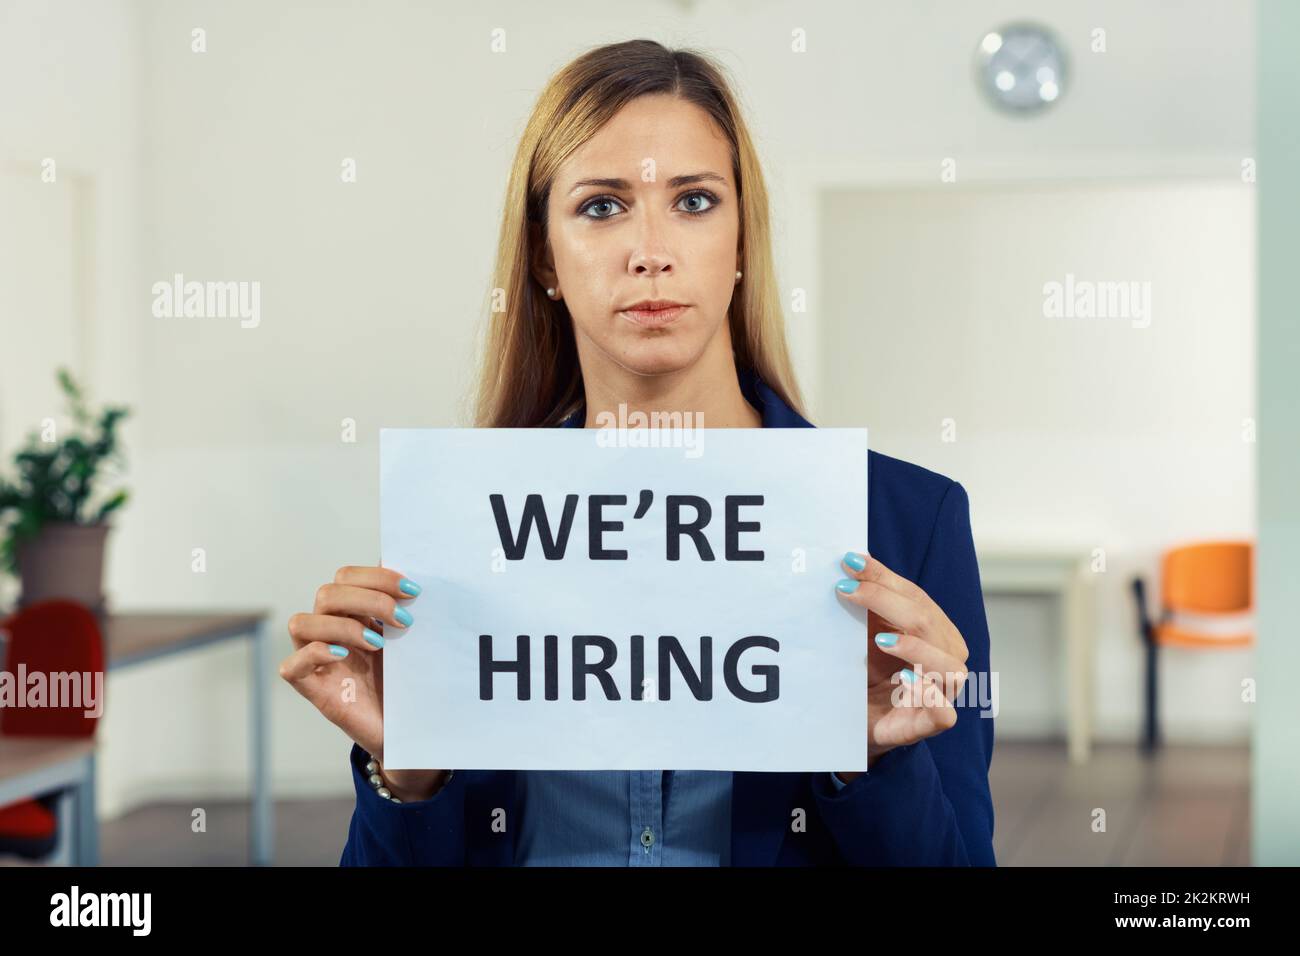 Personnel officer or manageress holding a We're Hiring sign Stock Photo